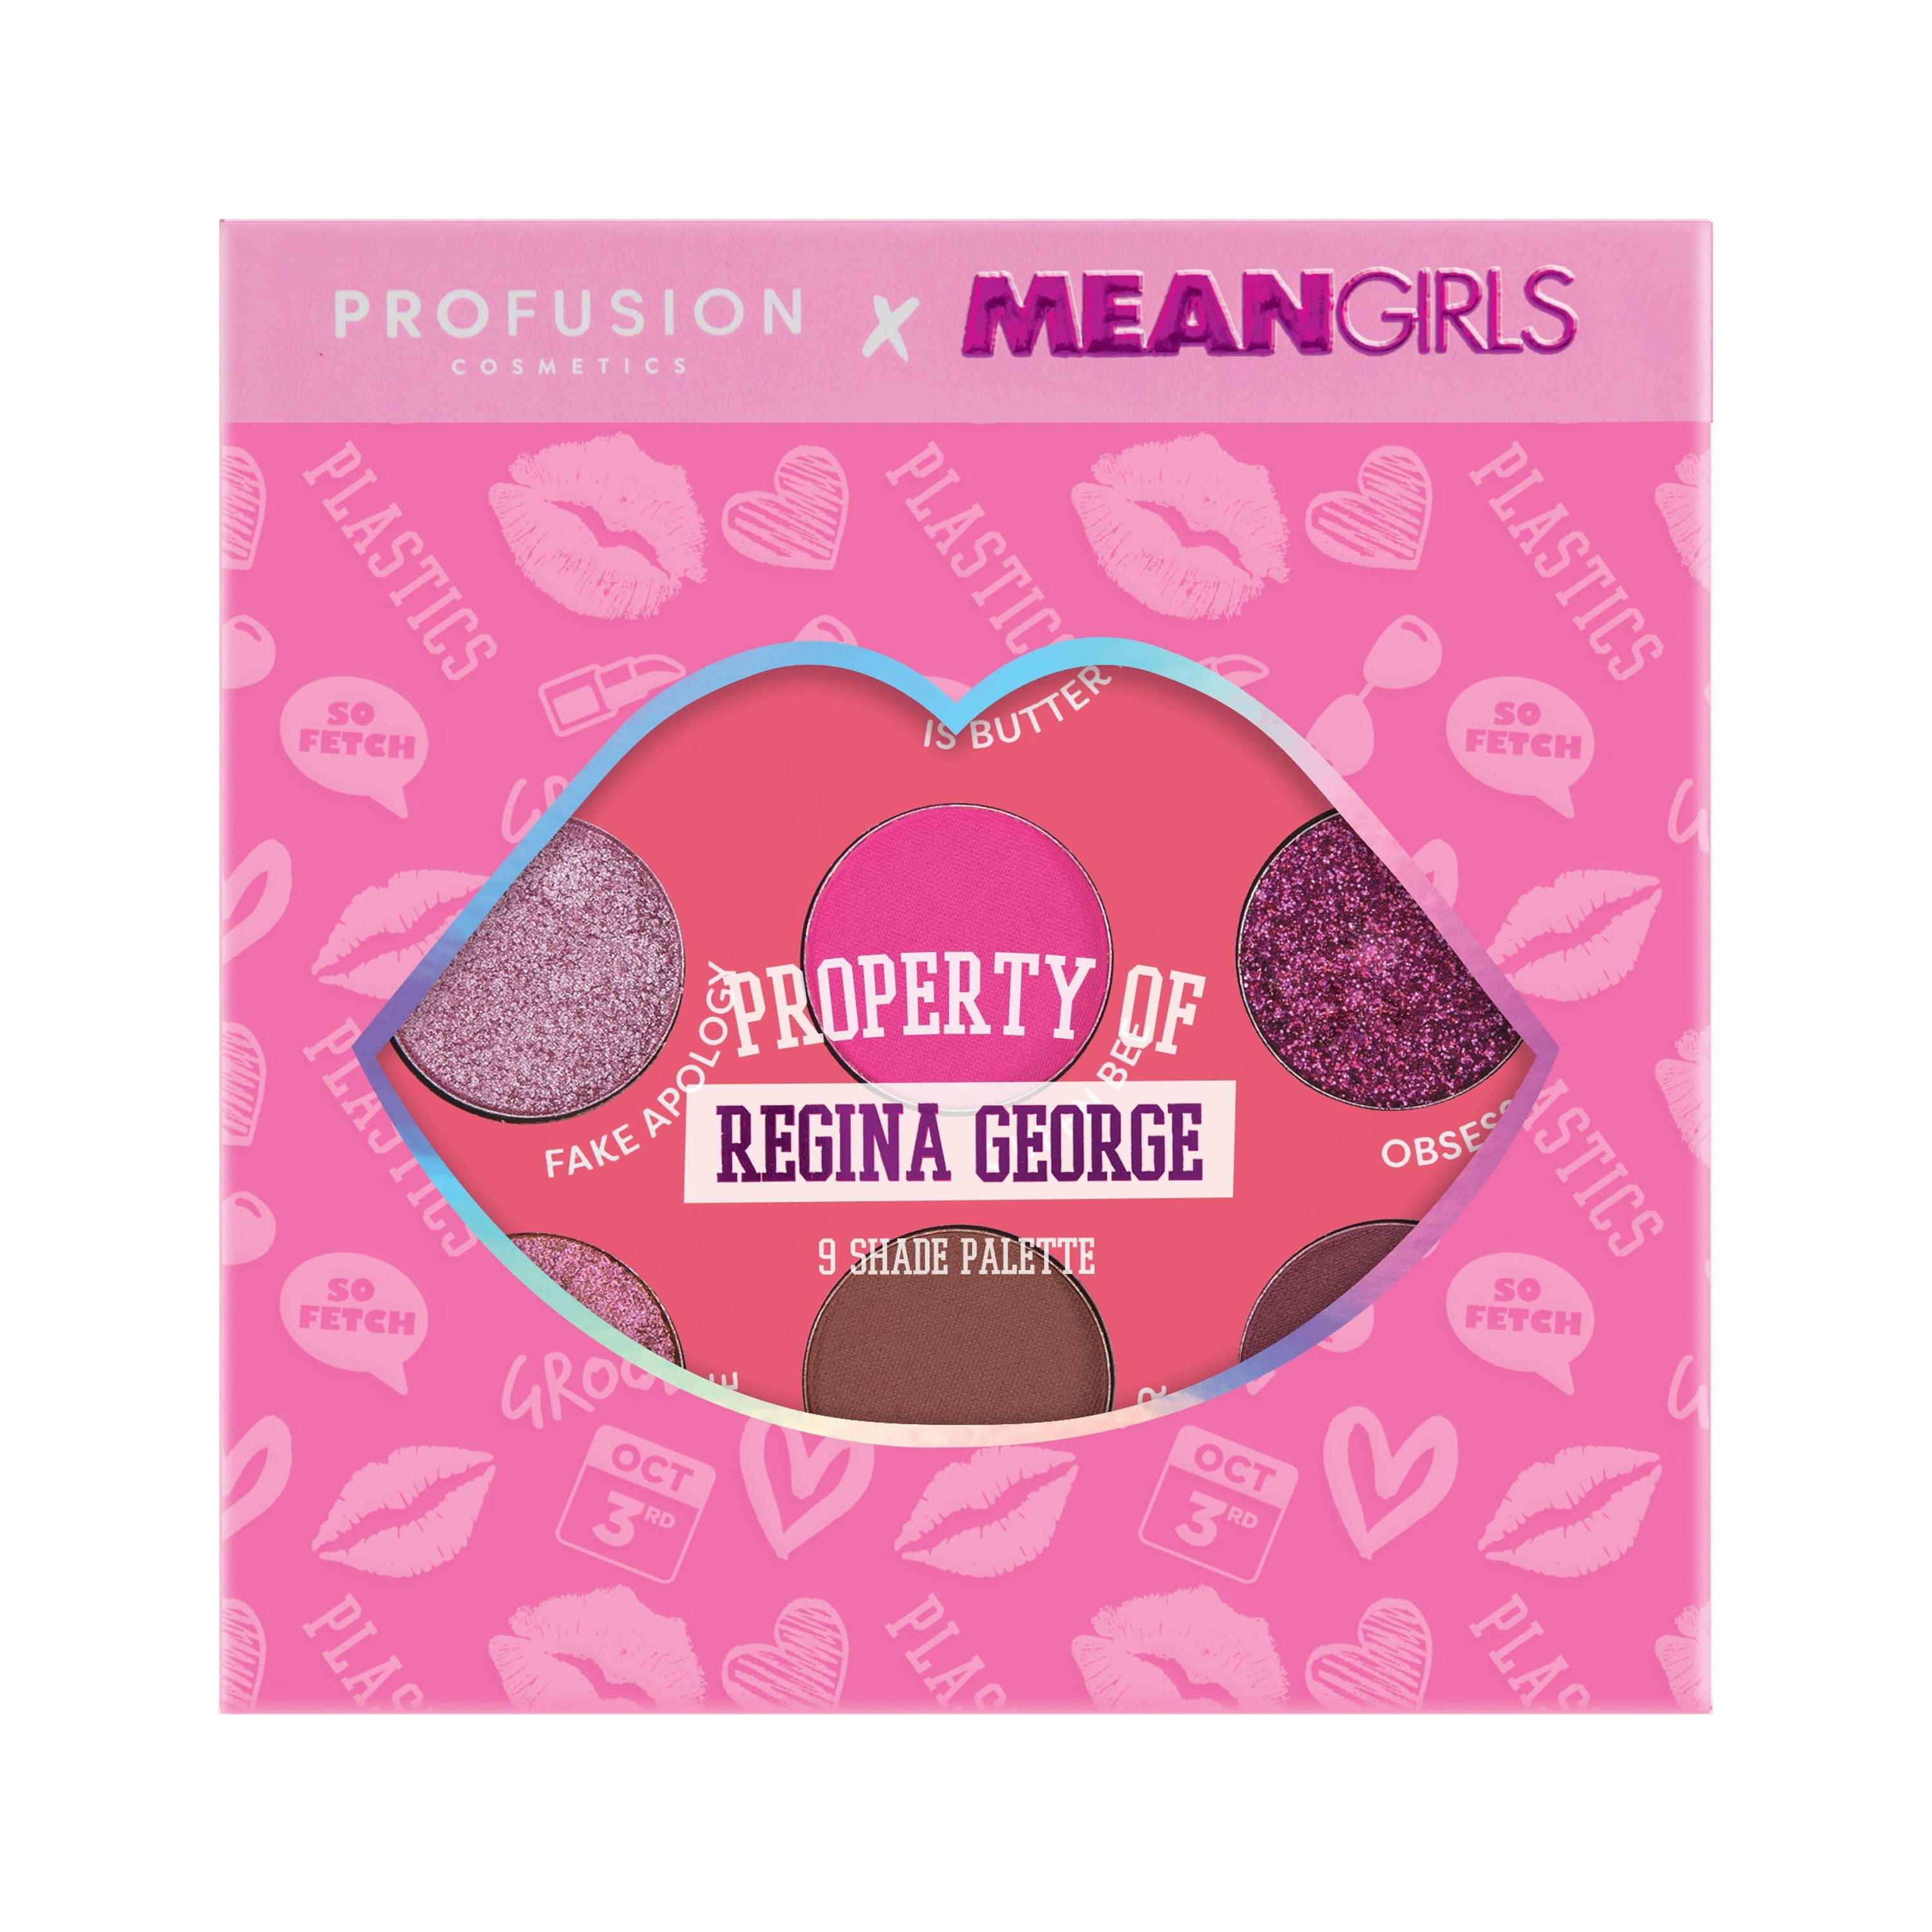 Profusion Cosmetics Mean Girls 9 Shade Palette - Property Of